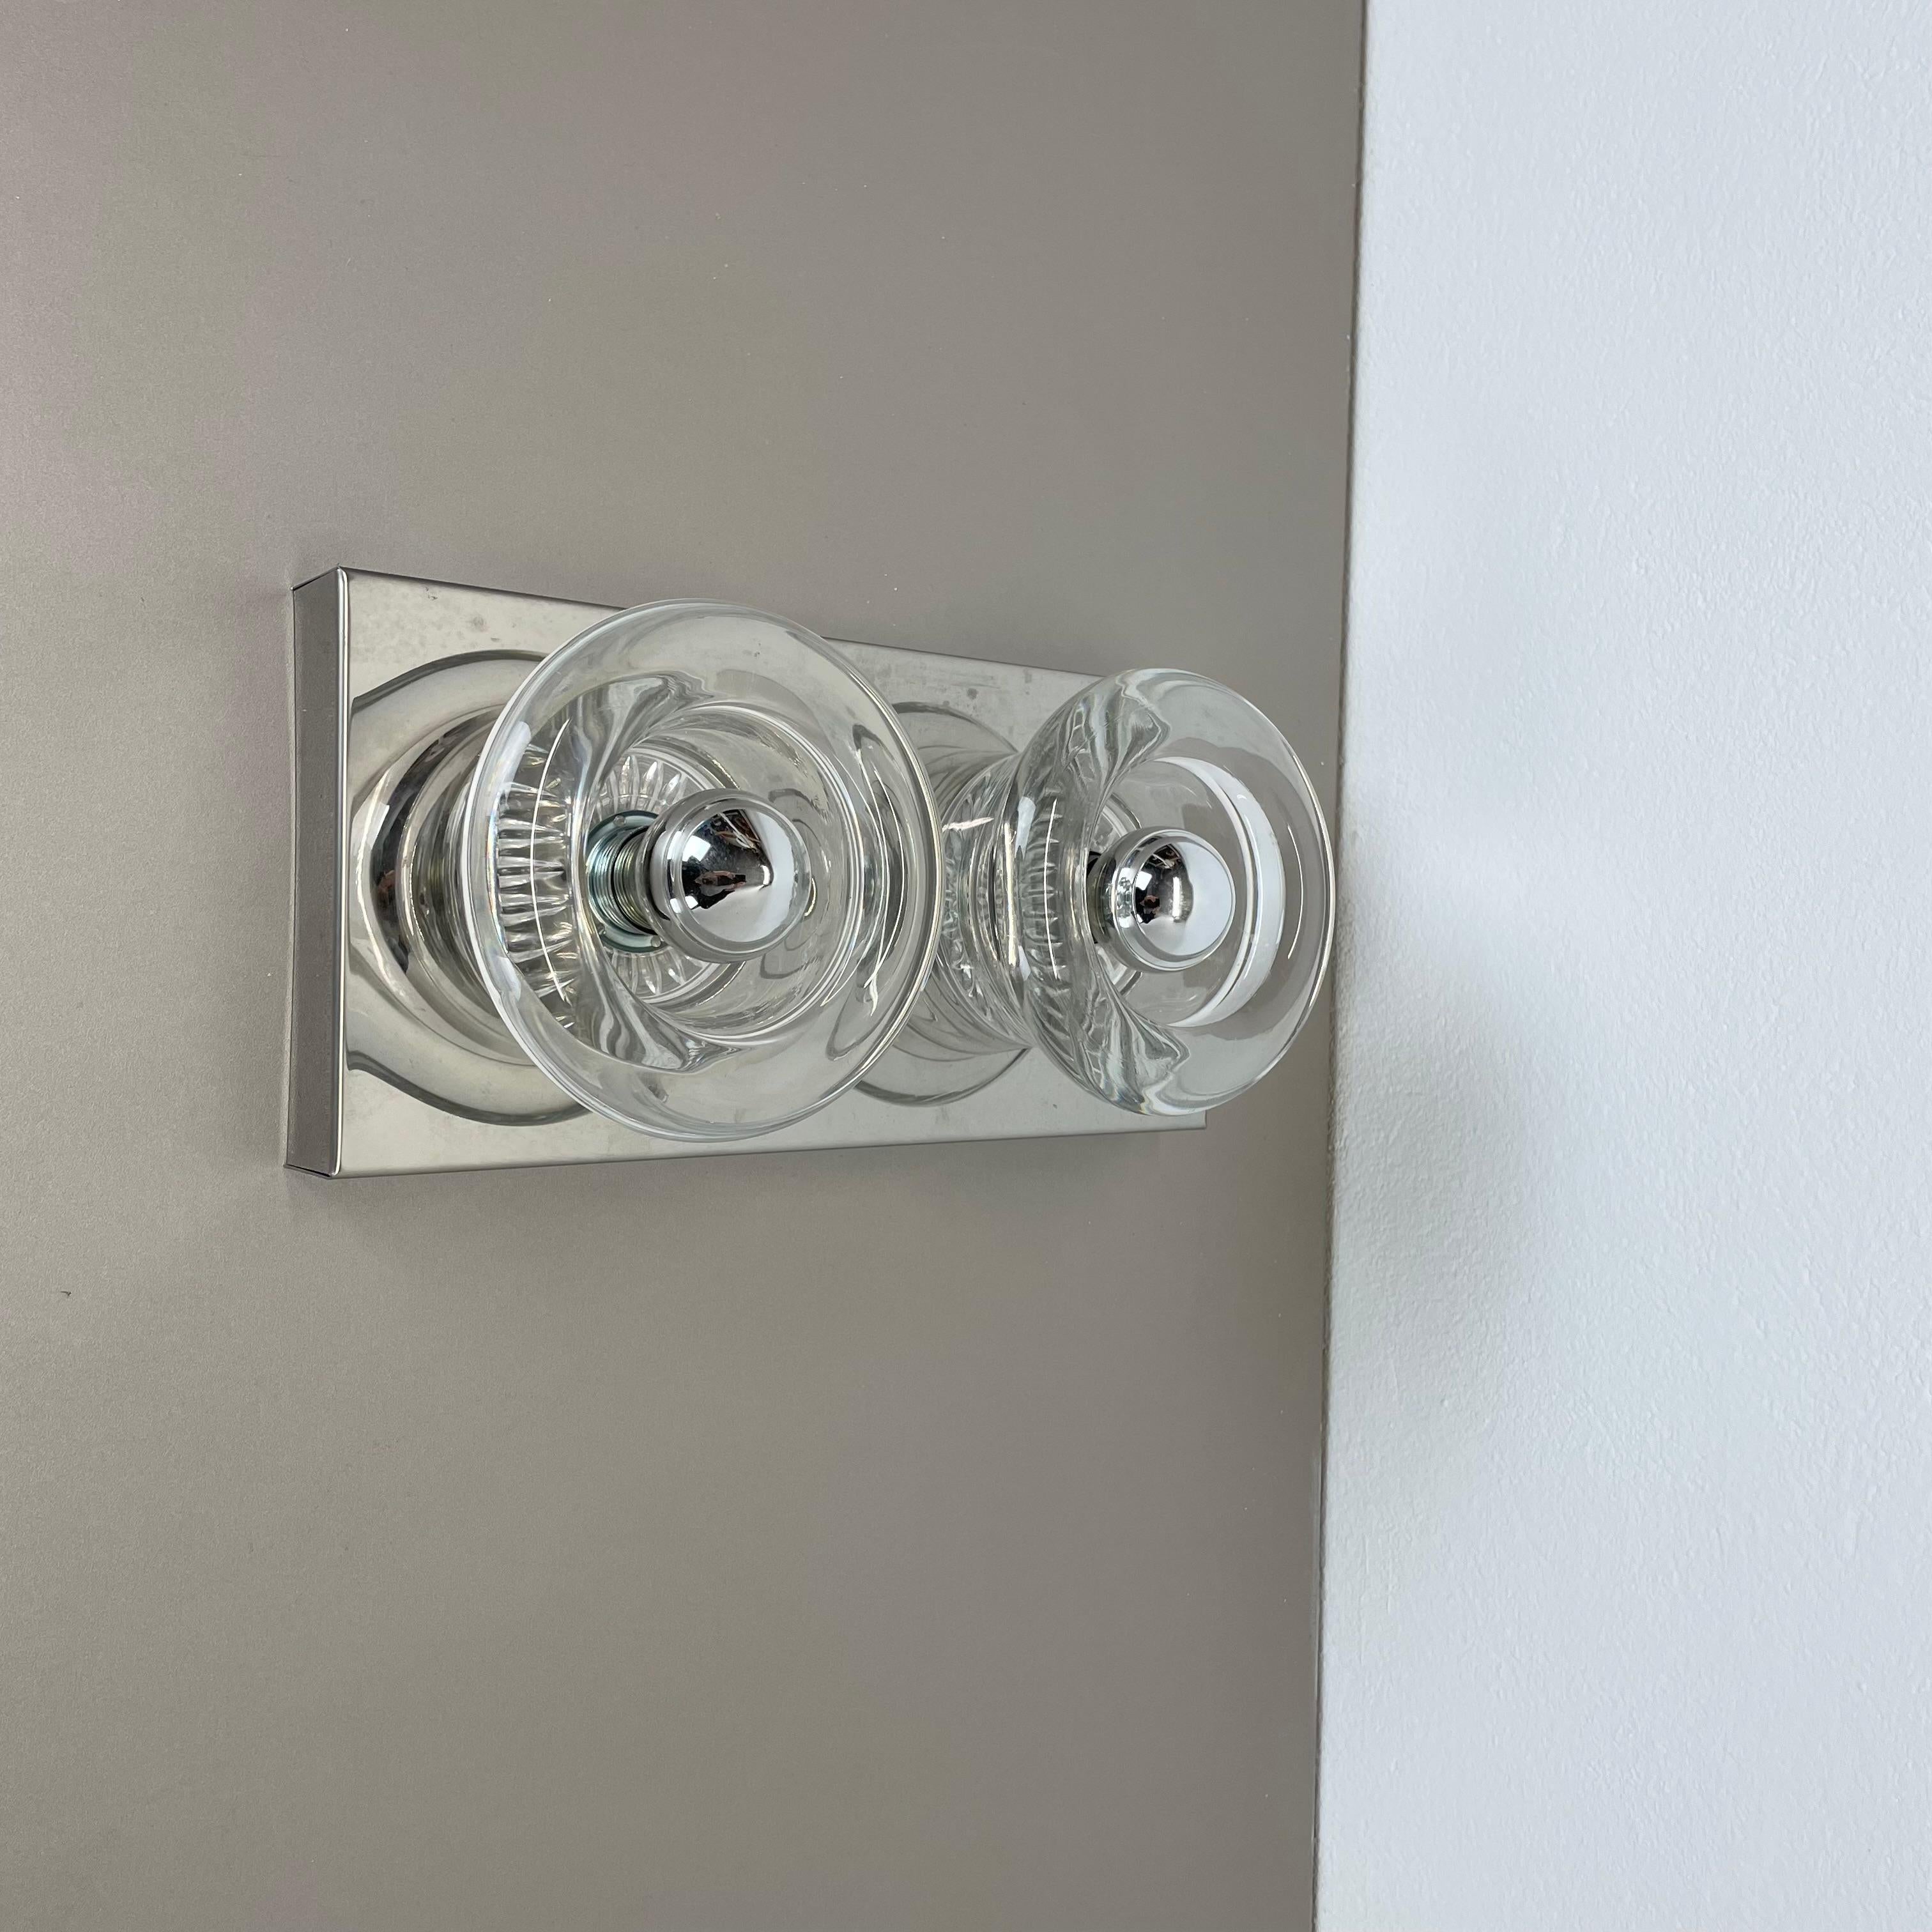 ARTICLE:

wall  ceiling light


PRODUCER:

COSACK Lights, Germany (see label)


ORIGIN:

Germany


AGE:

1970s




DESCRIPTION:

original 70s modernist wall Light with 2  glass  lighting elements. this light was designed and produced by Cosack